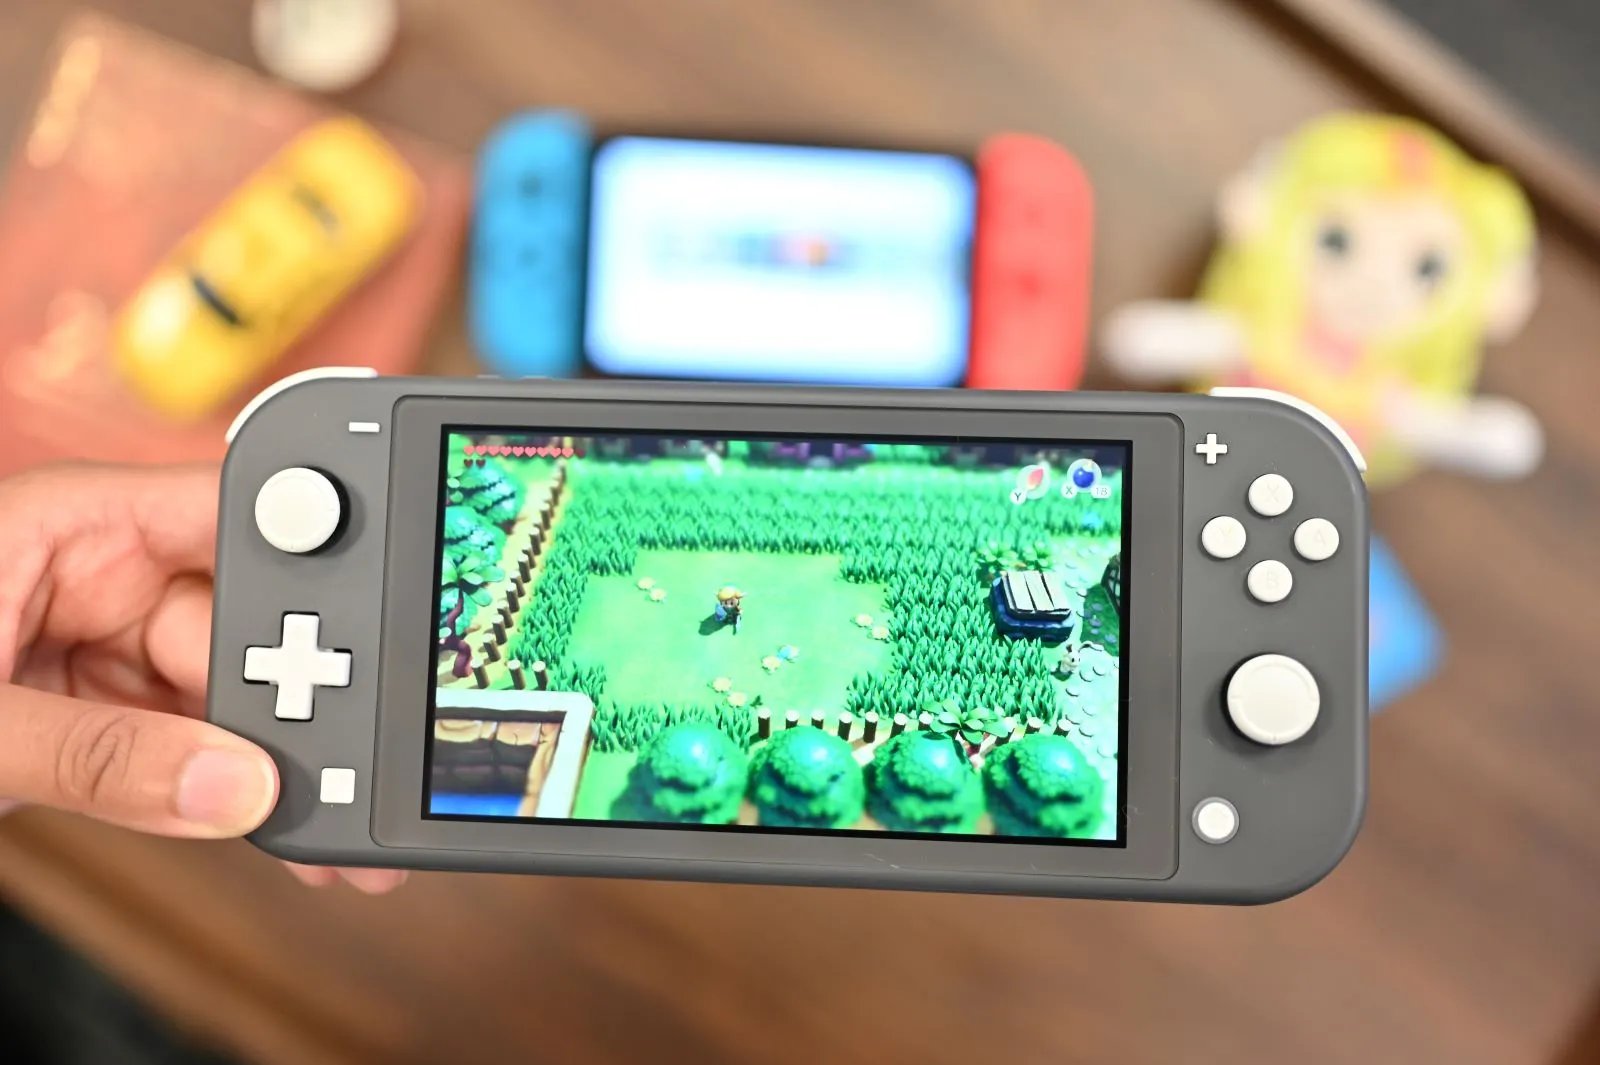 Can You Play Multiplayer Games On The Nintendo Switch Lite?